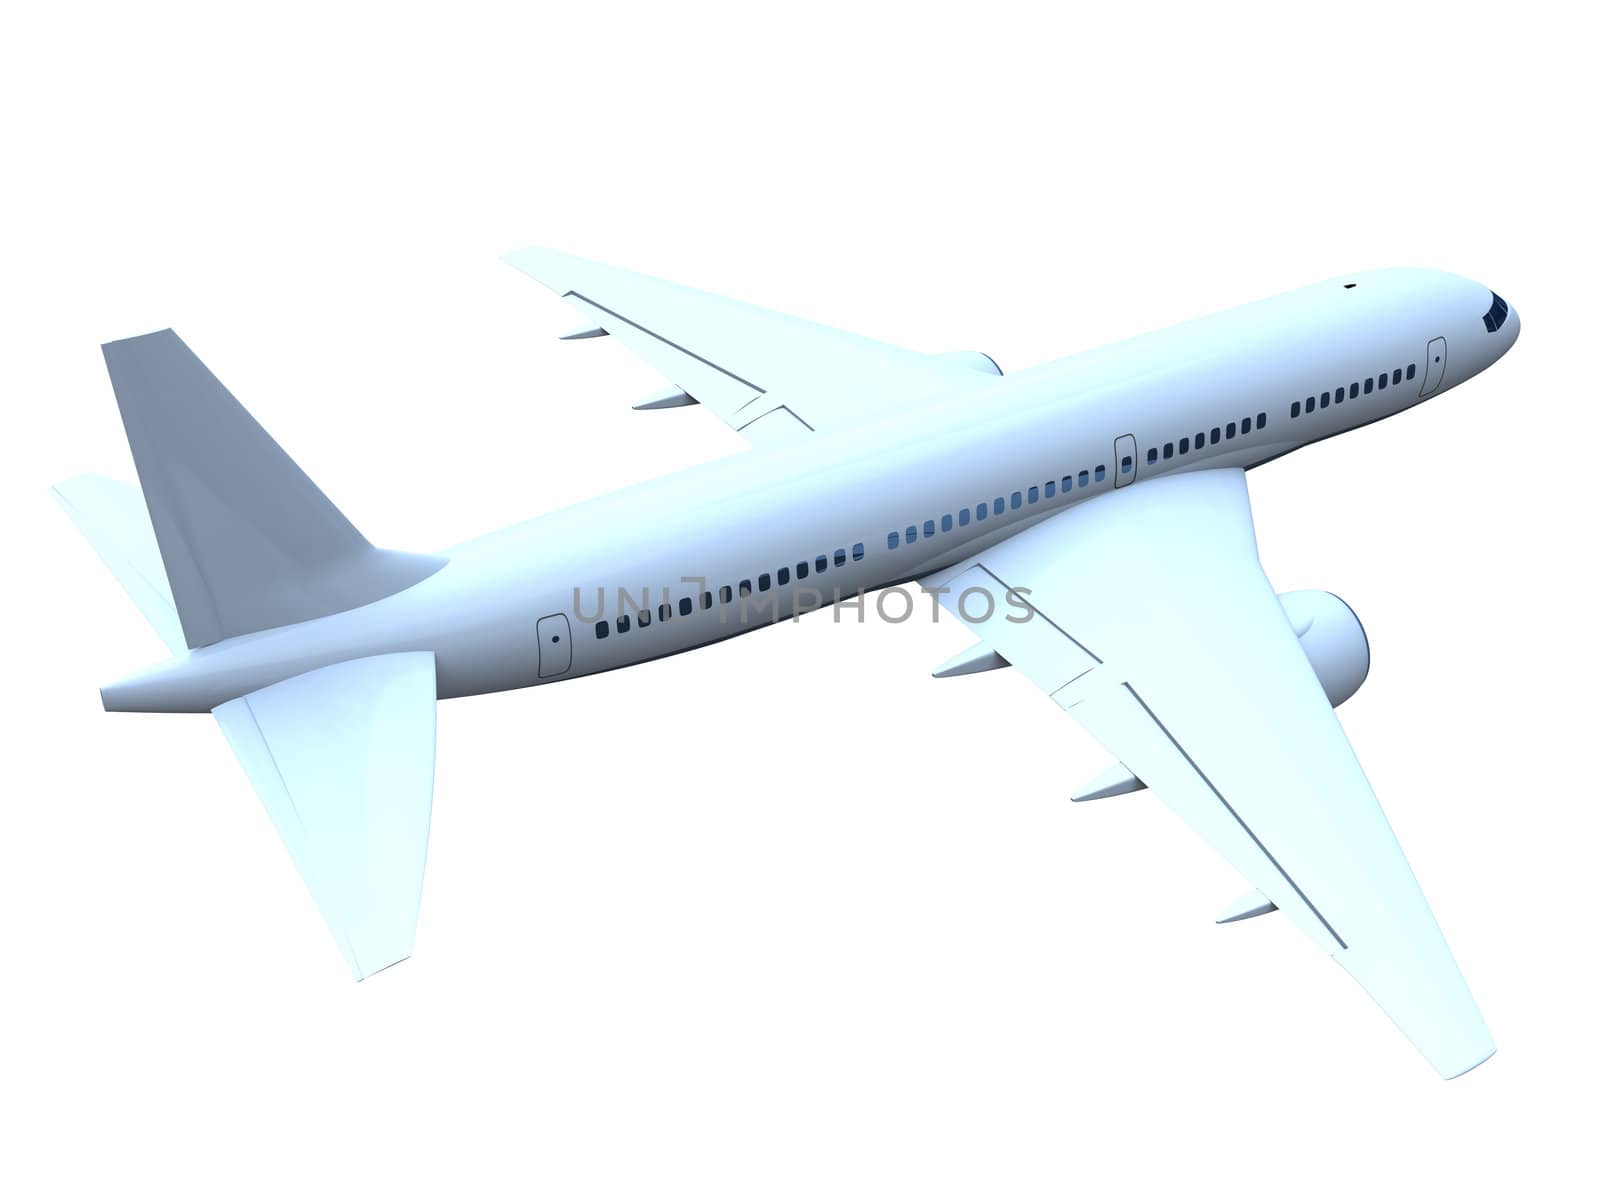 3D model of flying passenger aircraft isolated on white background